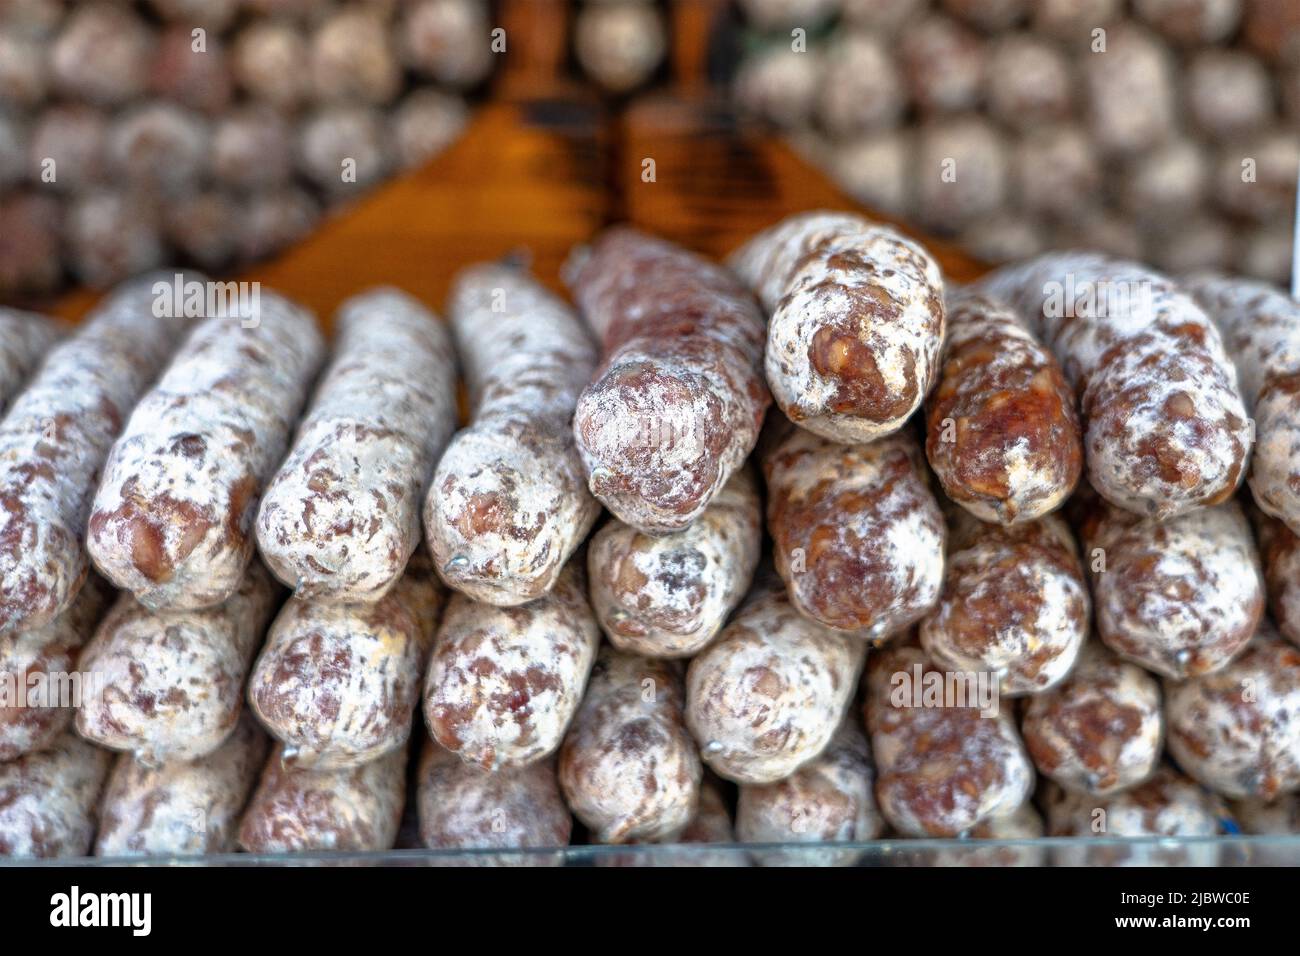 Stacks of dry-cured sausages - saucisson, typically made of pork, or a mixture of pork and other meats. Stock Photo